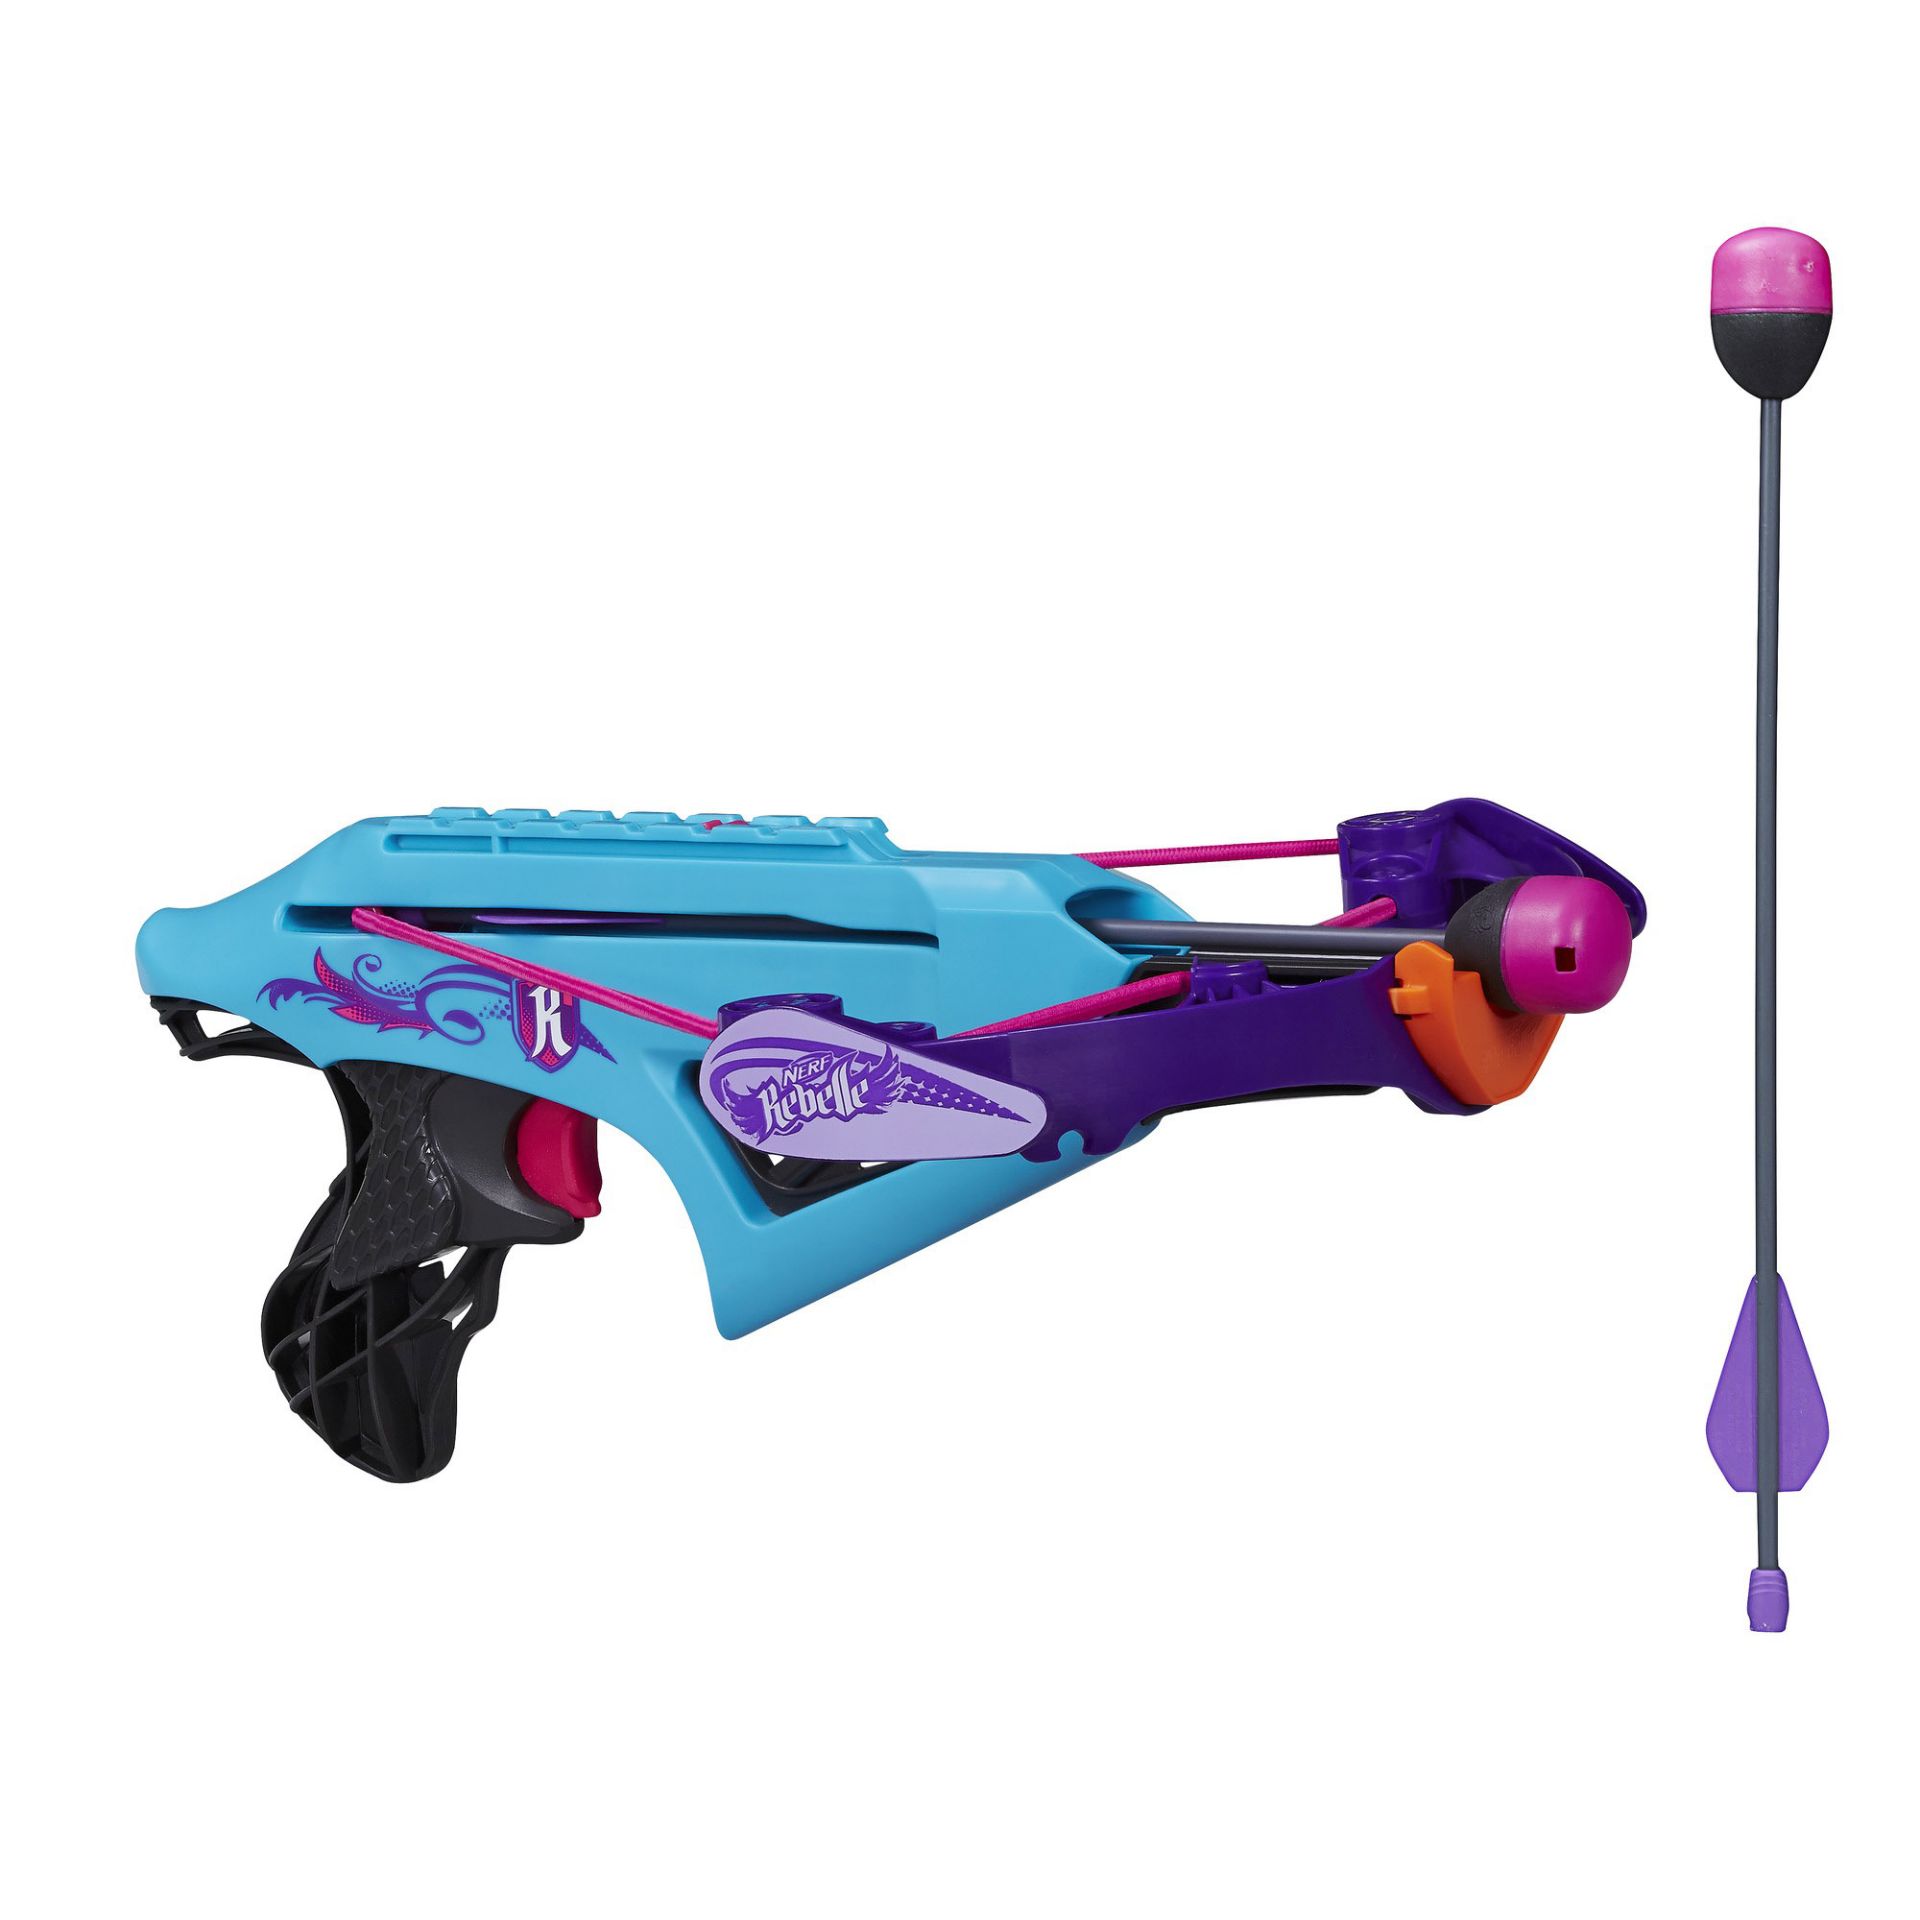 V Brand New Hasbro Nerf Rebelle Secrets And Spies Courage Crossbow With Real Crossbow Action - 2